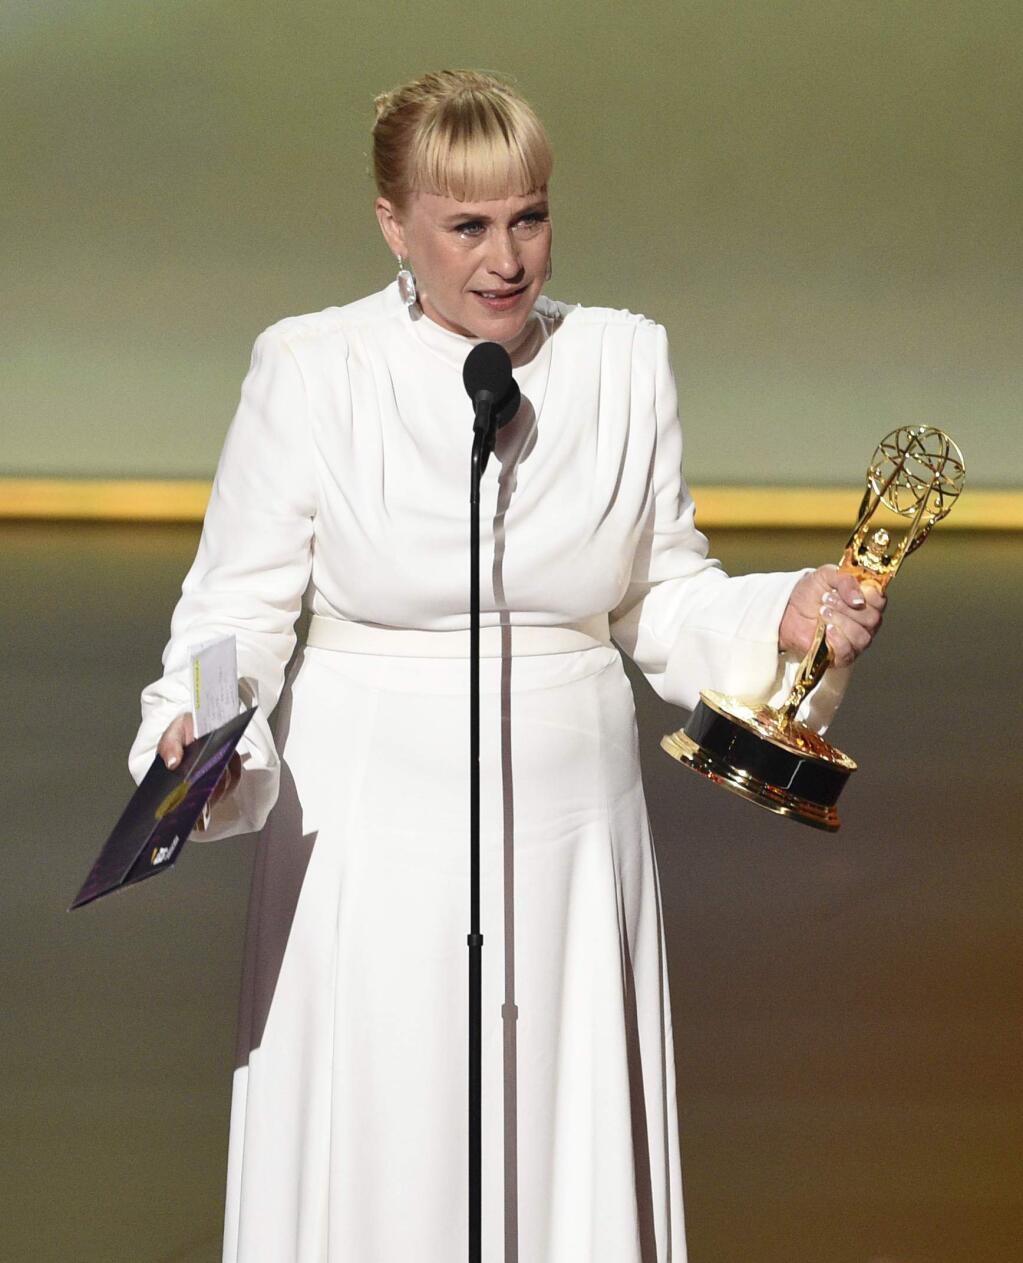 Patricia Arquette accepts the award for outstanding supporting actress in a limited series or movie for 'The Act' at the 71st Primetime Emmy Awards on Sunday, Sept. 22, 2019, at the Microsoft Theater in Los Angeles. (Photo by Chris Pizzello/Invision/AP)